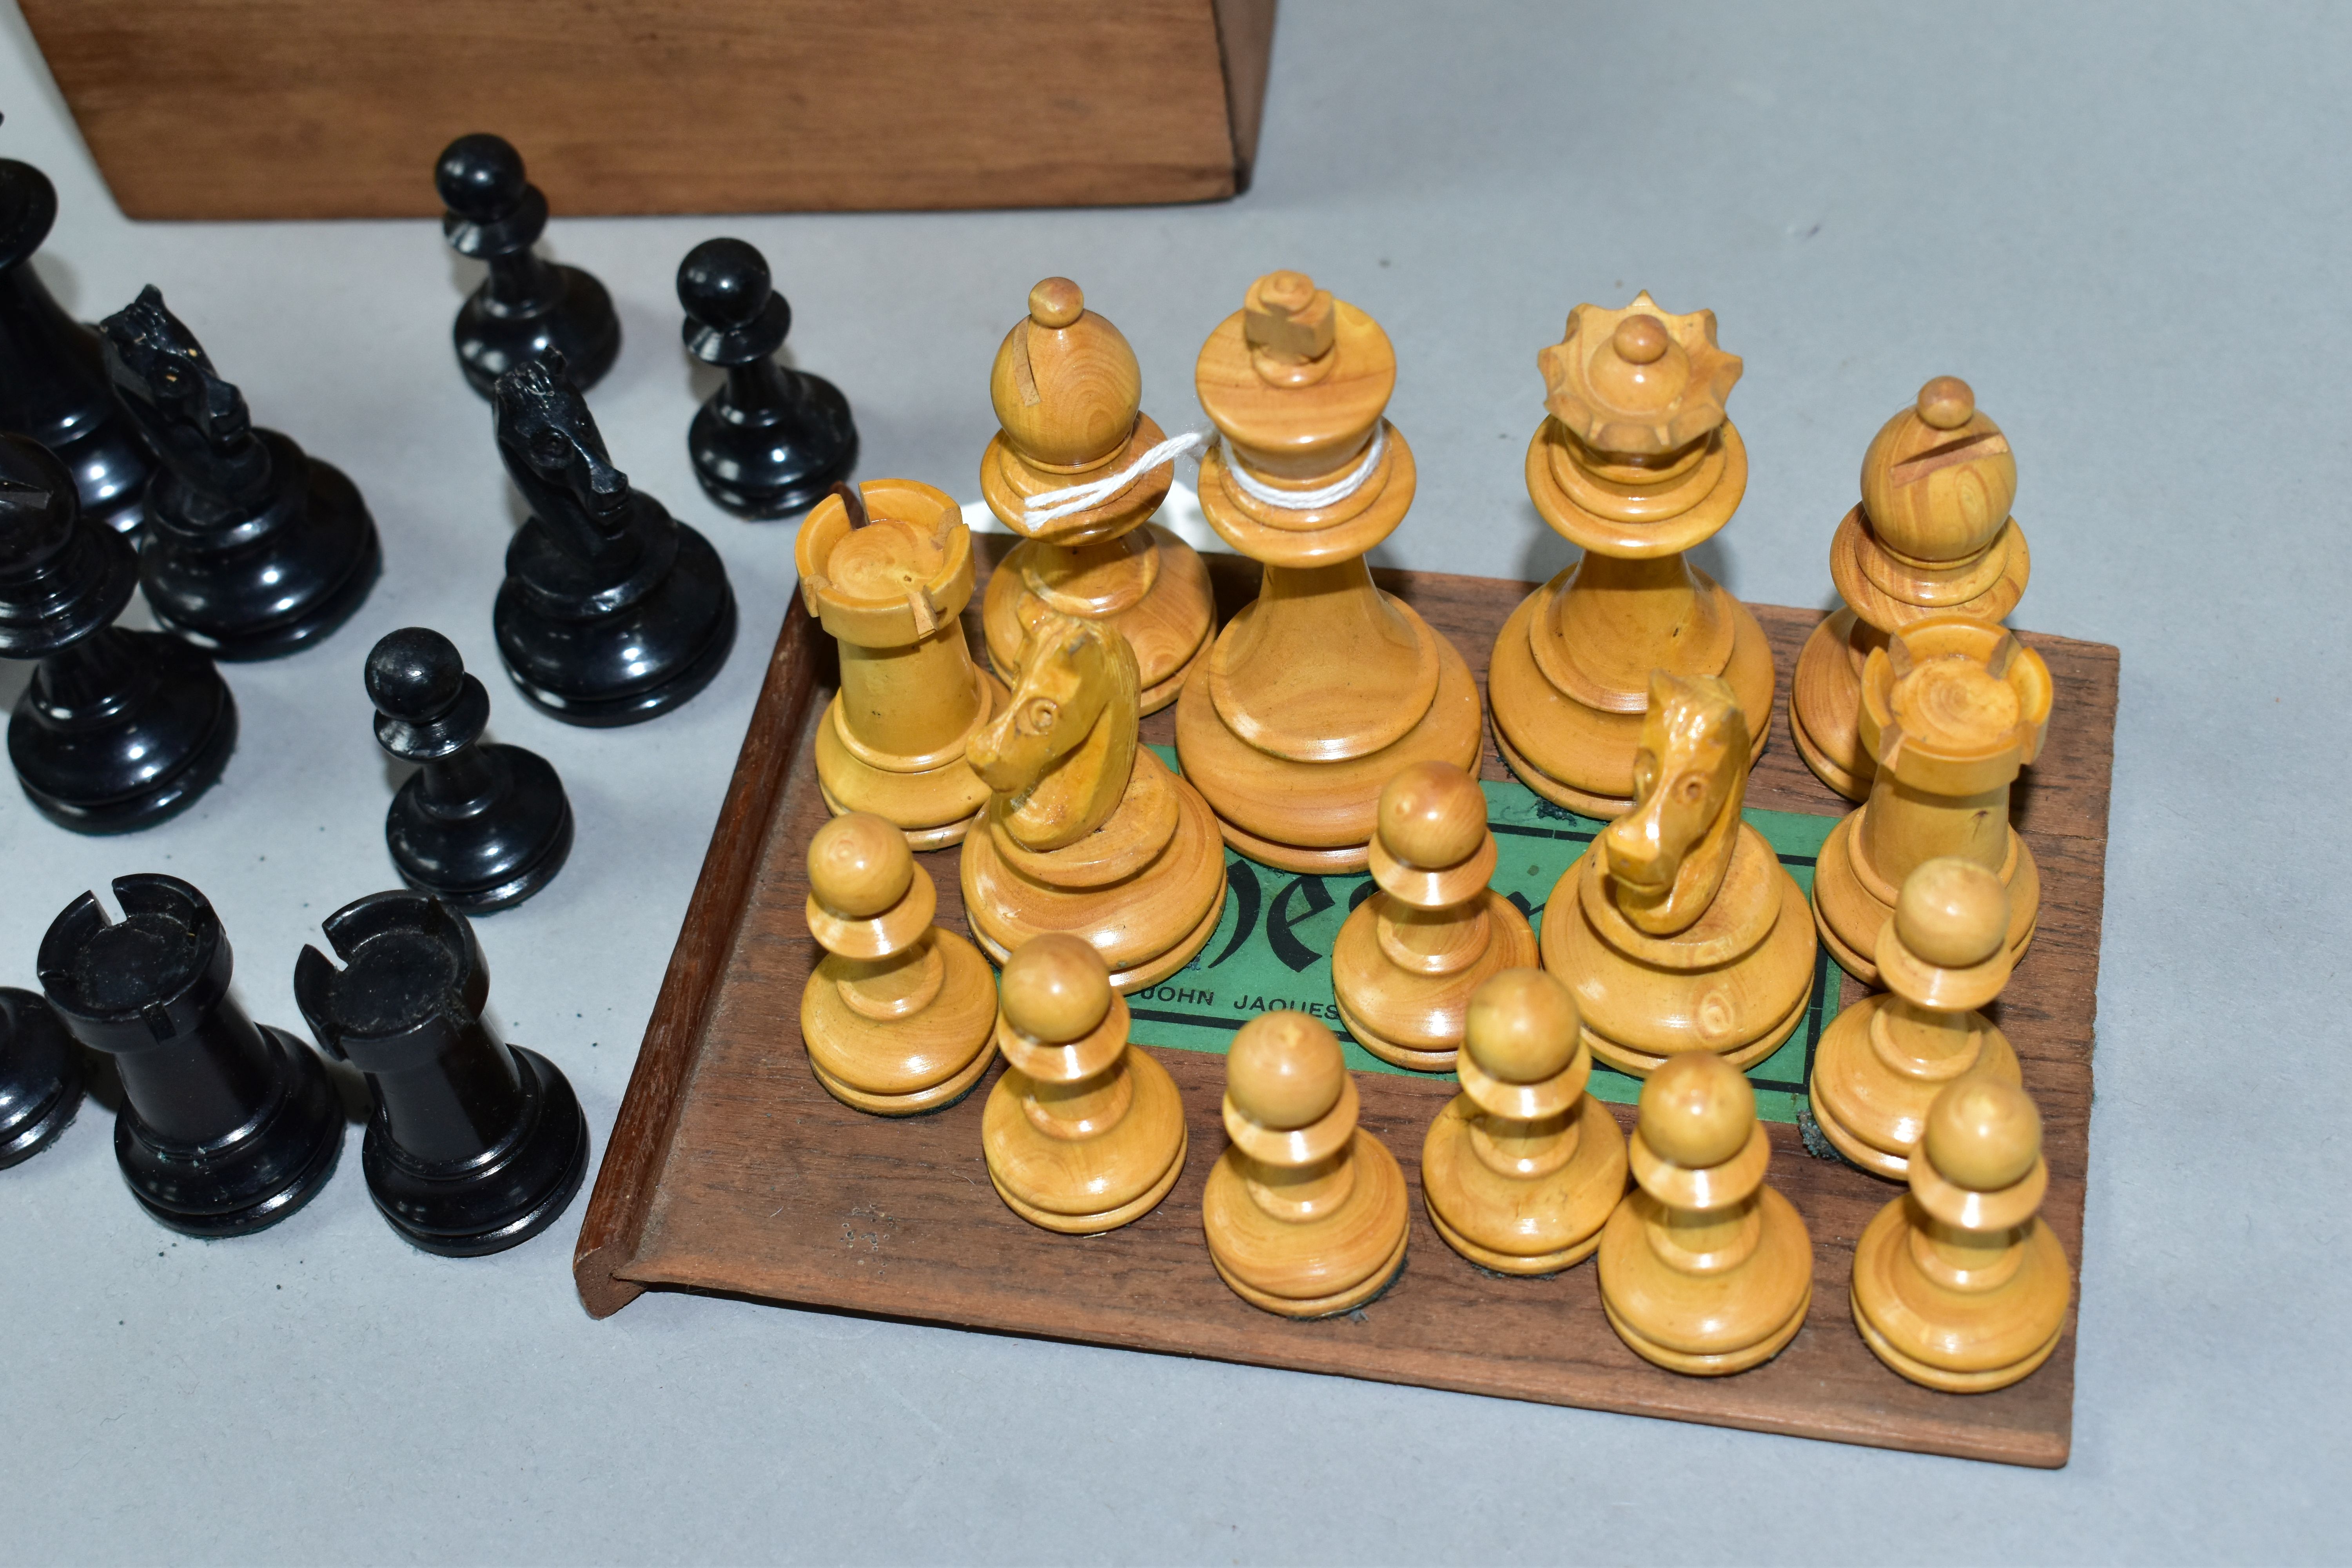 A BOXED WOODEN ORIGINAL CHESS SET, all pieces present, no obvious damage (1) - Image 5 of 5